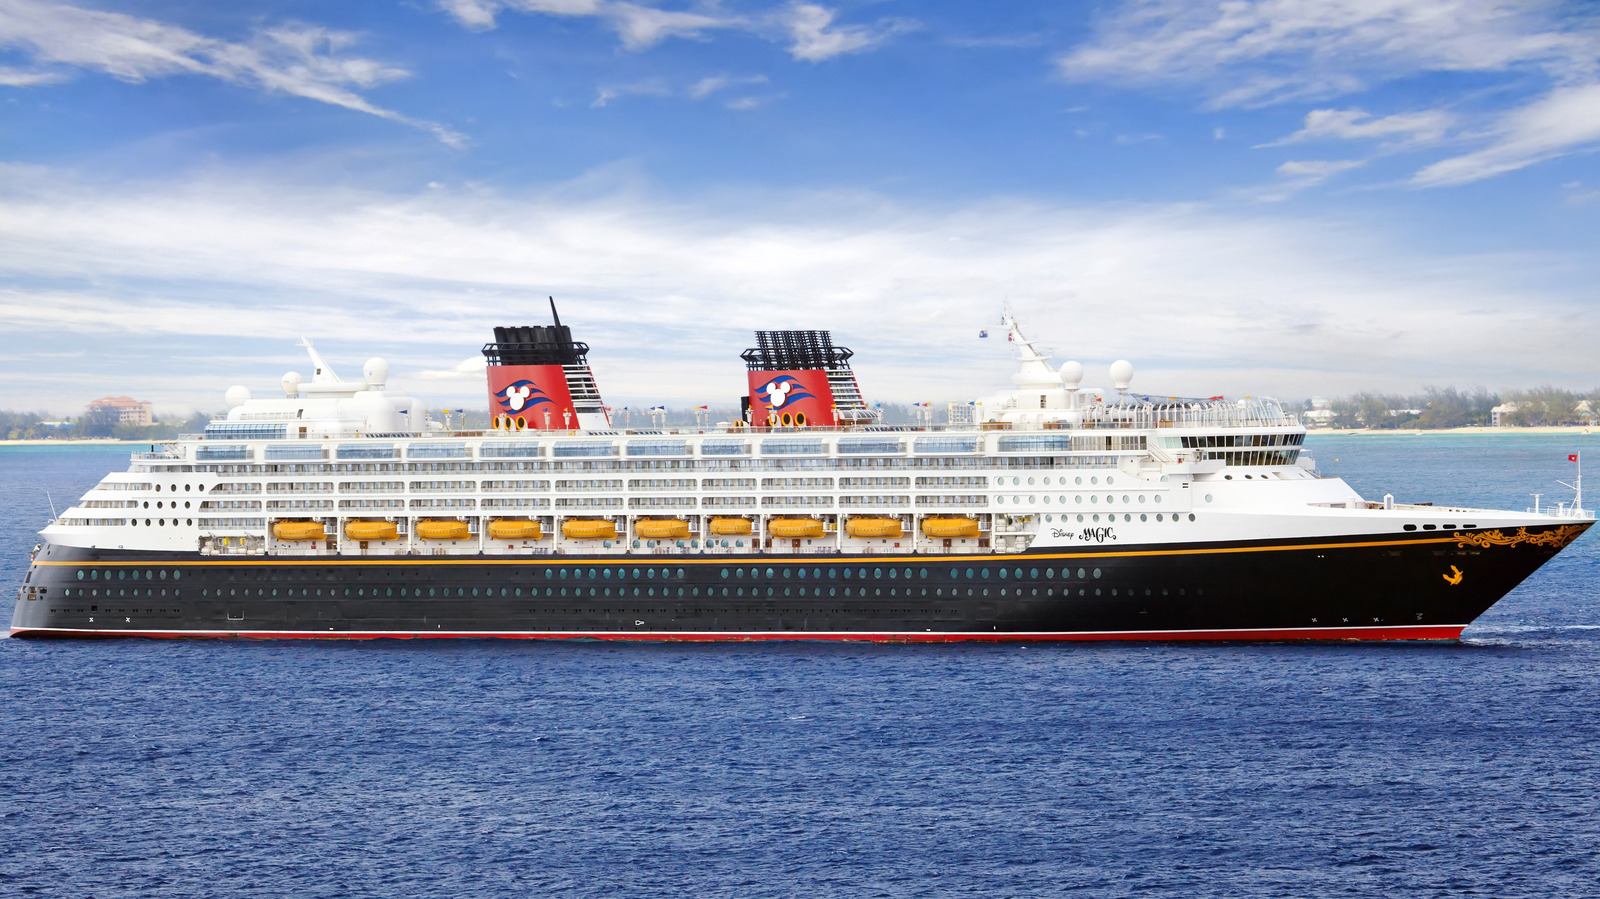 Disney Cruise Ship Moored In An Ocean Background, Disney Cruise Ship  Pictures Background Image And Wallpaper for Free Download